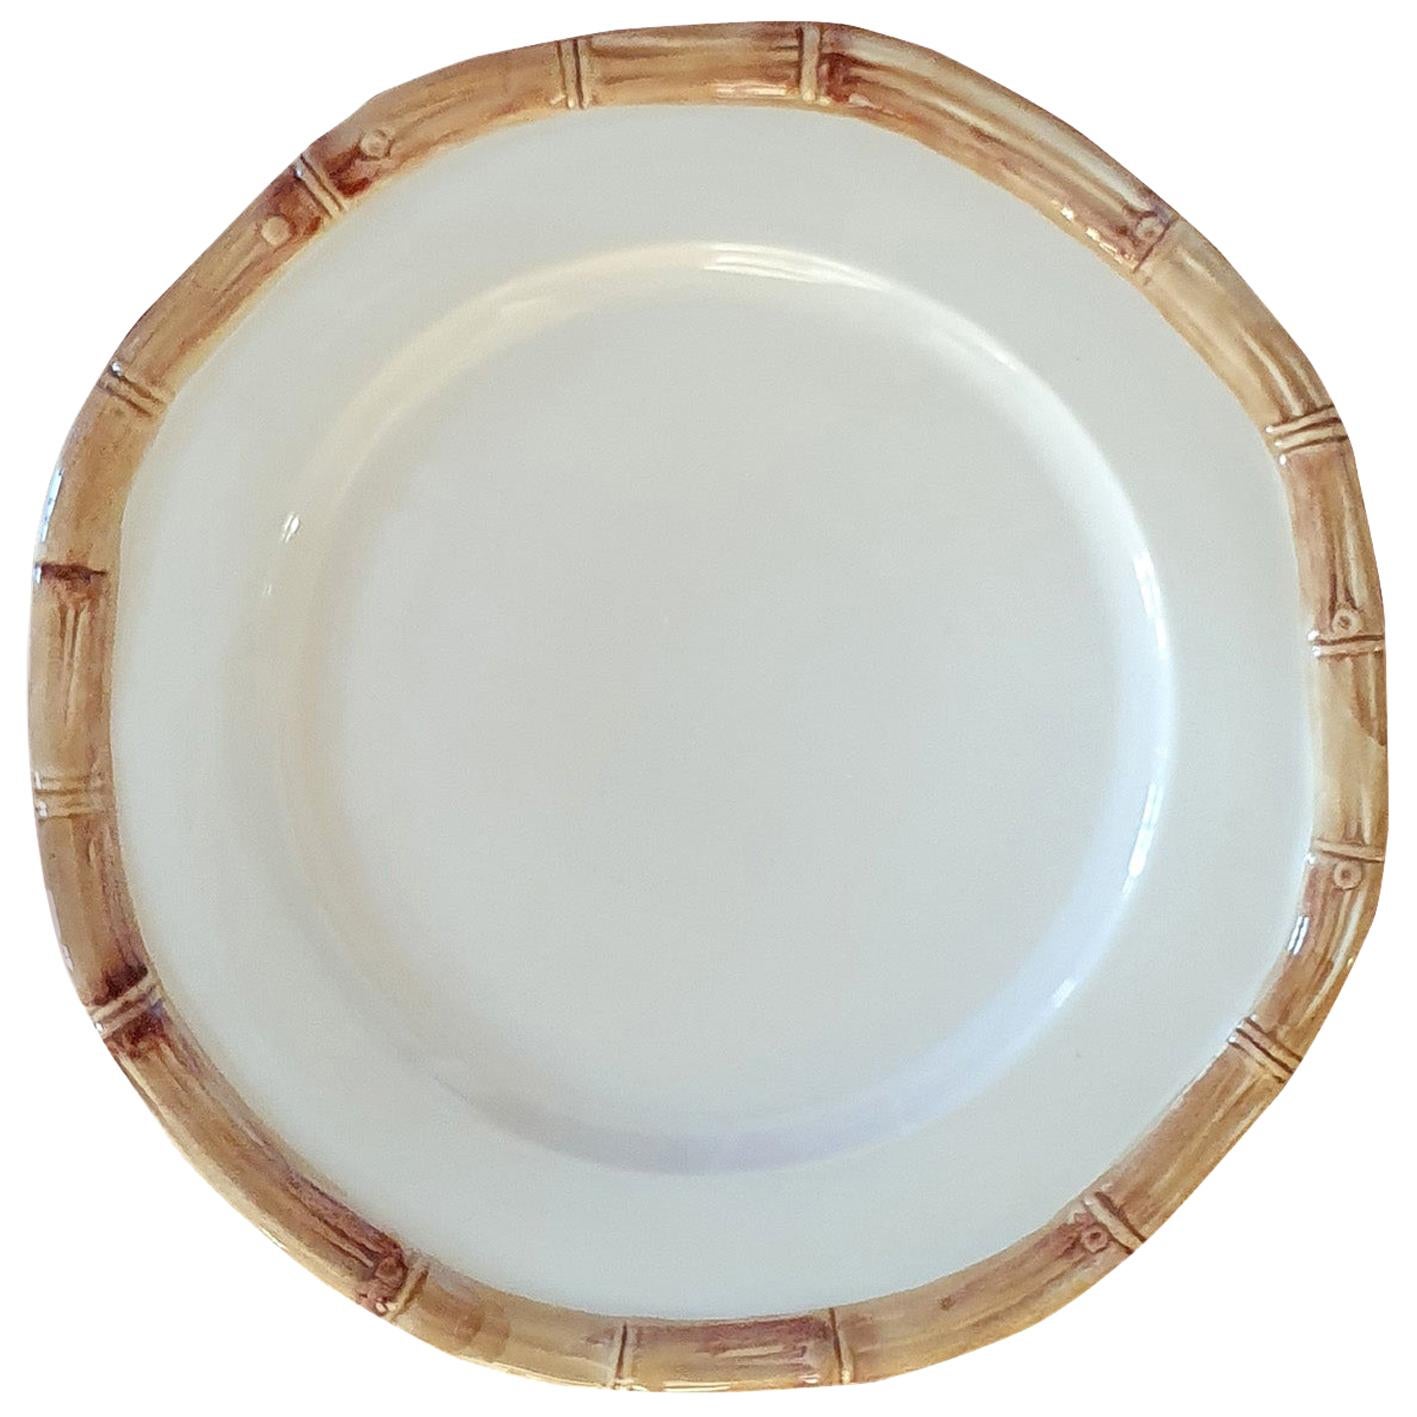 Set of 4 Ceramic Dinner Bamboo Plates Made in Italy